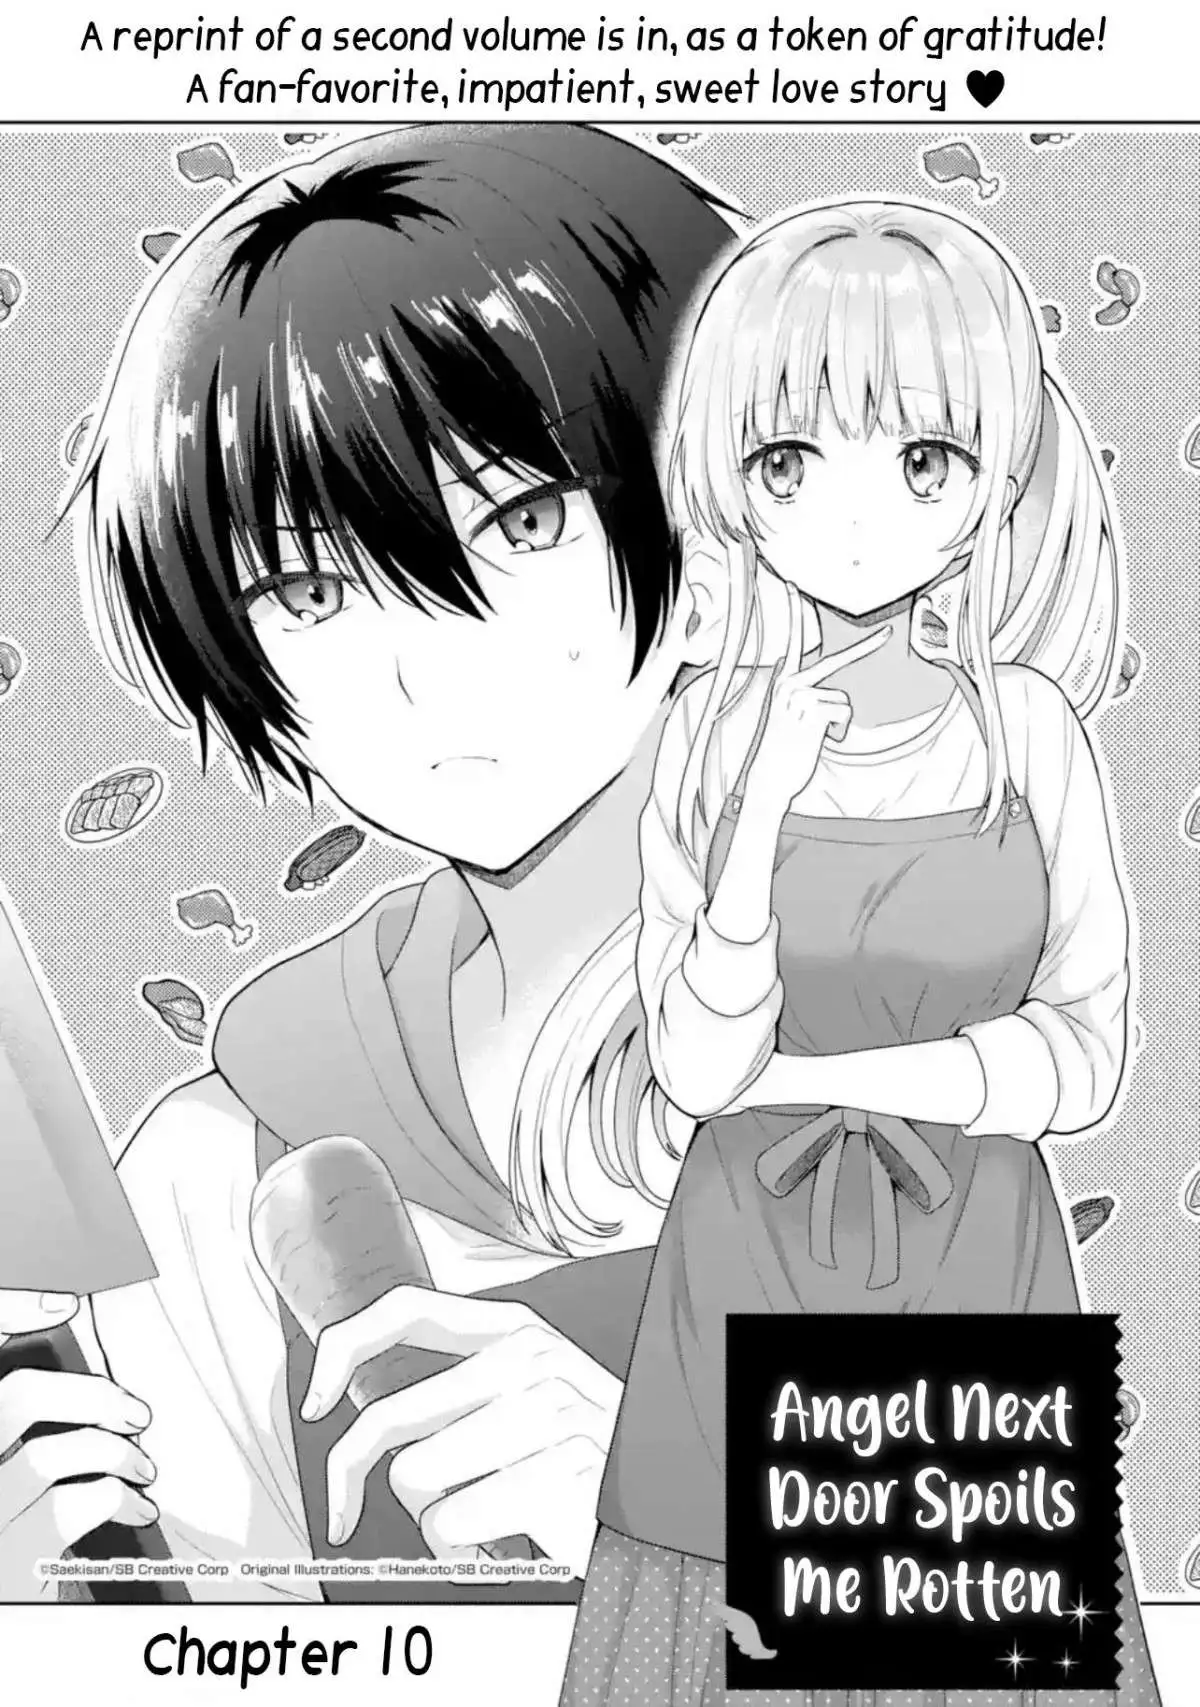 The Angel Next Door Spoils Me Rotten: After The Rain - 10.1 page 1-31ffdfe2